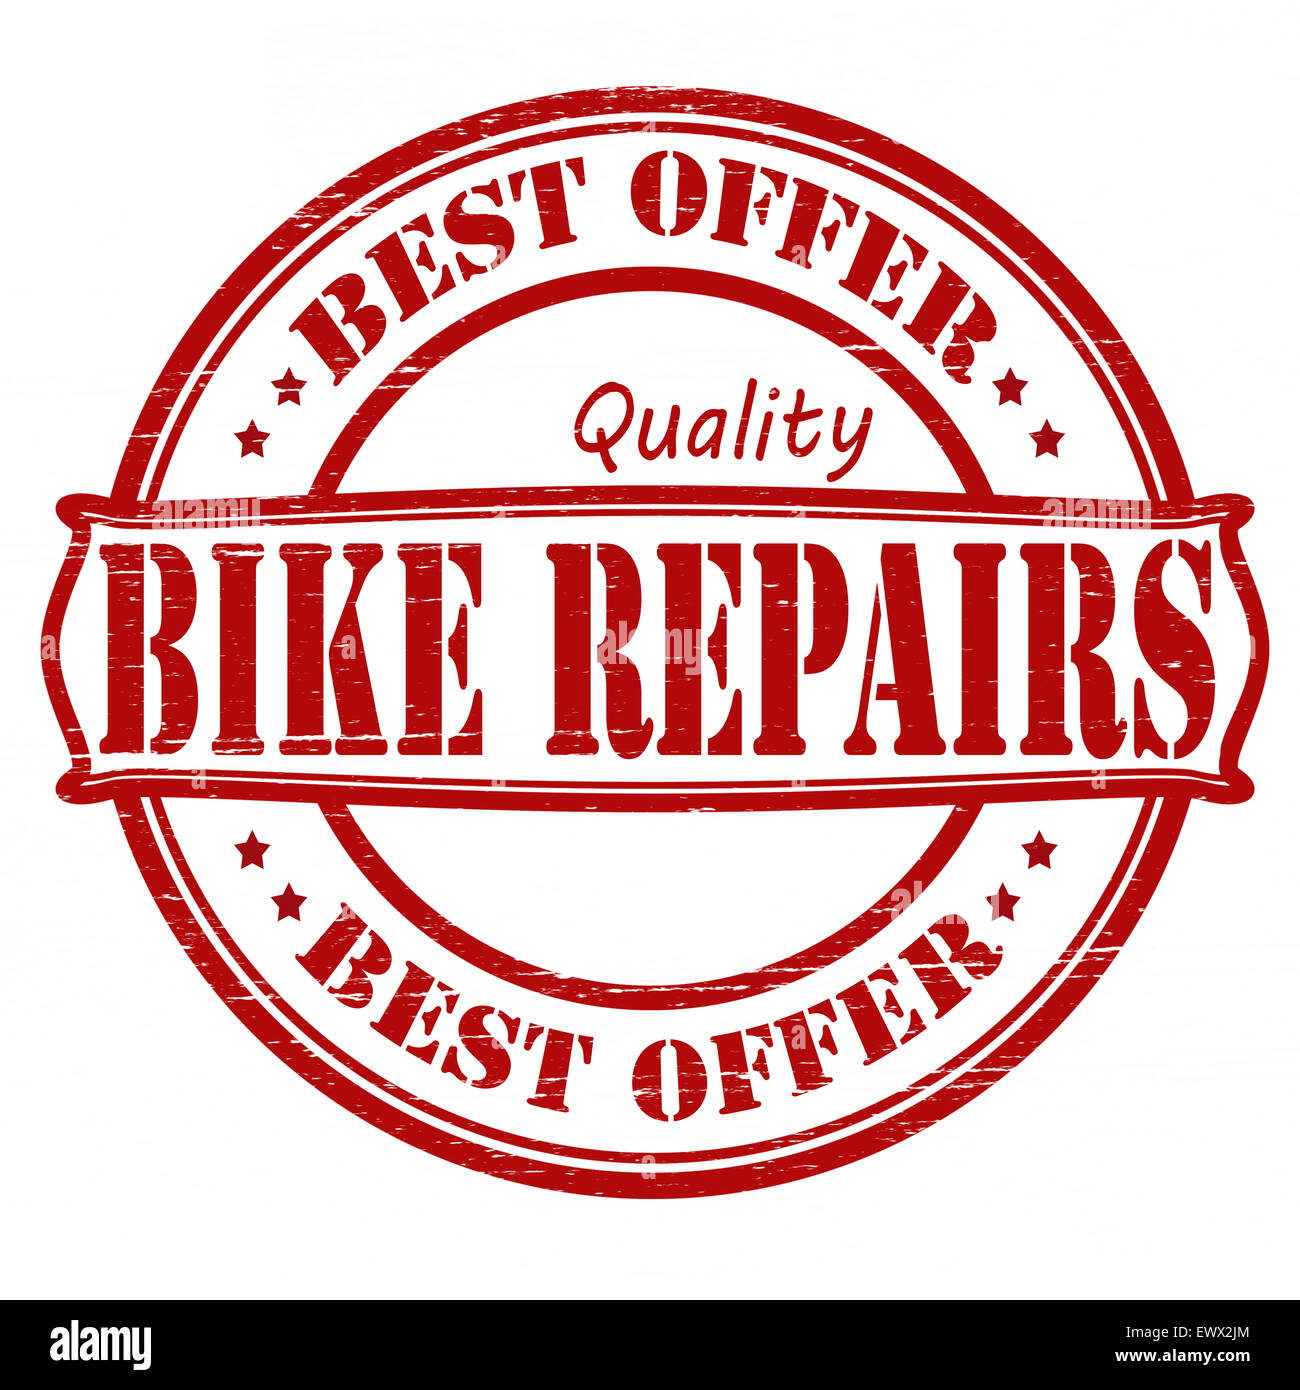 Stamp with text bike repairs inside, illustration Stock Photo